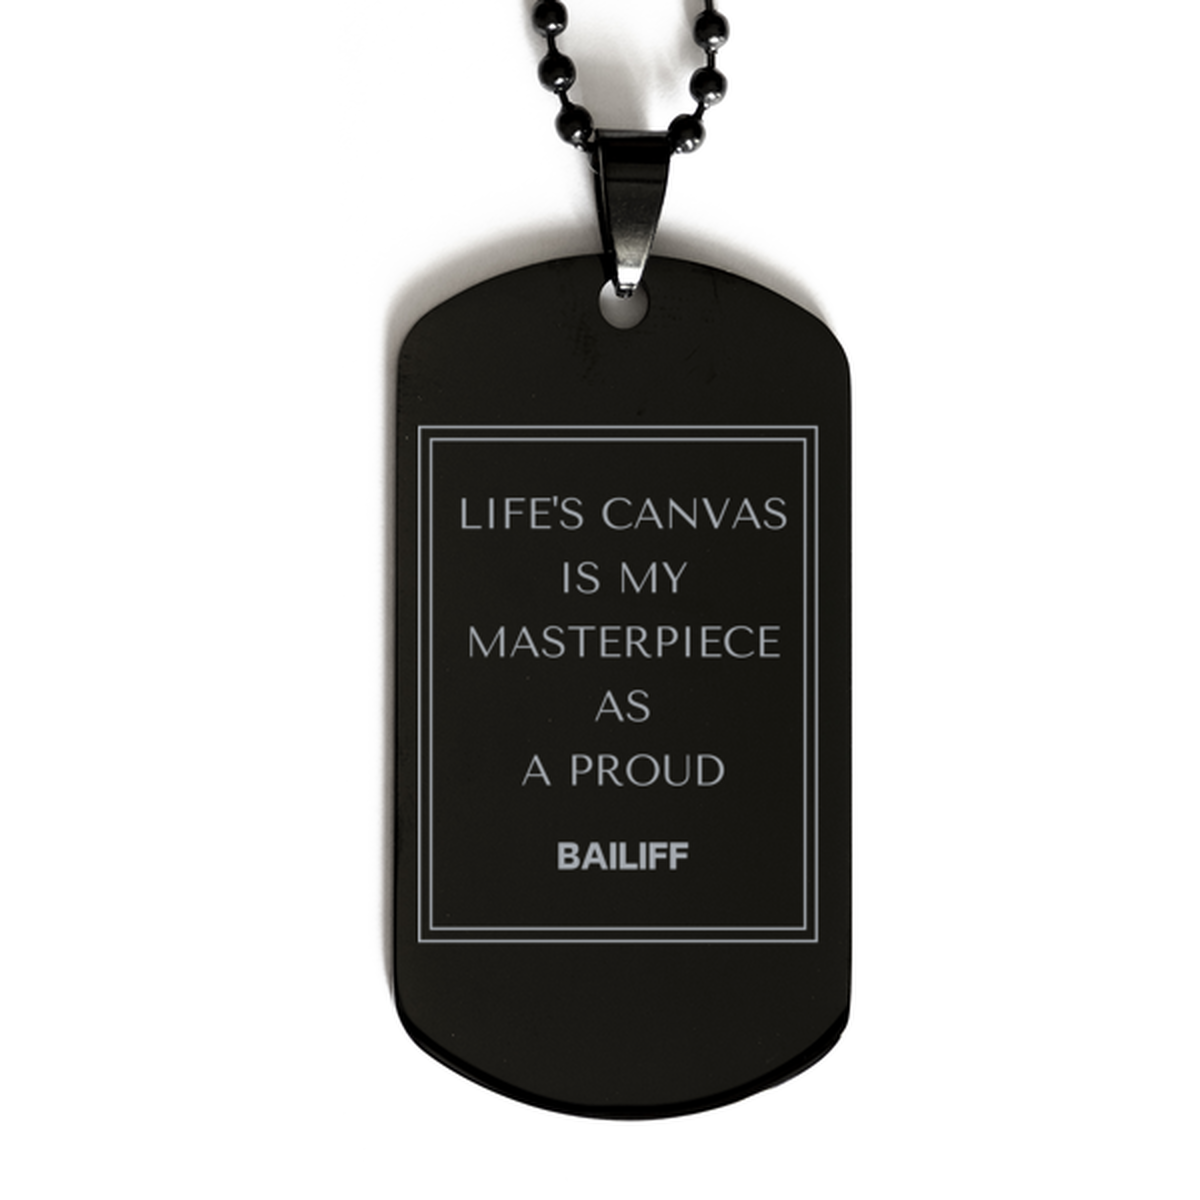 Proud Bailiff Gifts, Life's canvas is my masterpiece, Epic Birthday Christmas Unique Black Dog Tag For Bailiff, Coworkers, Men, Women, Friends